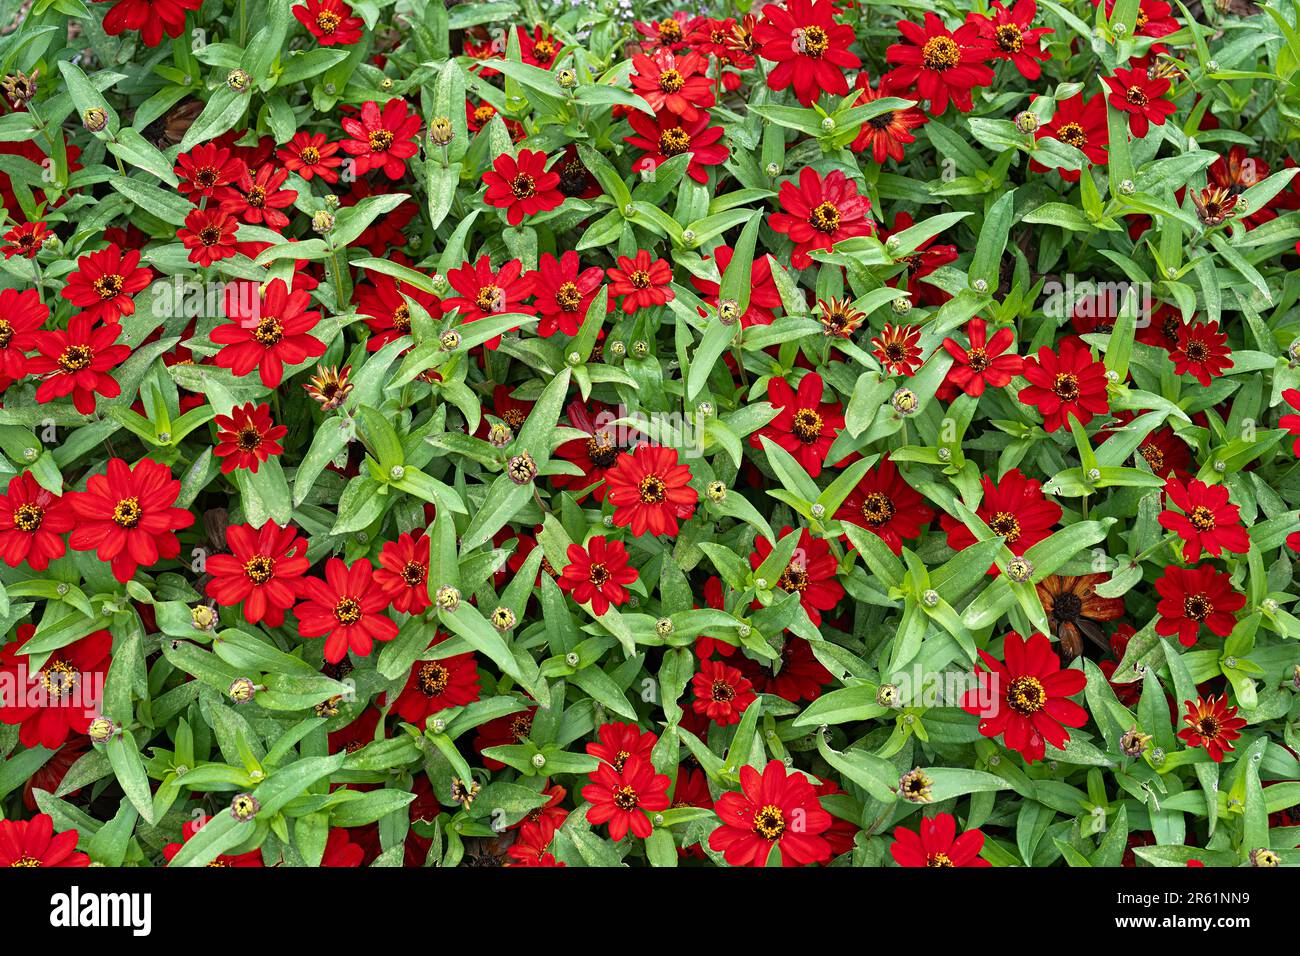 A background of dainty red zinnias. Stock Photo